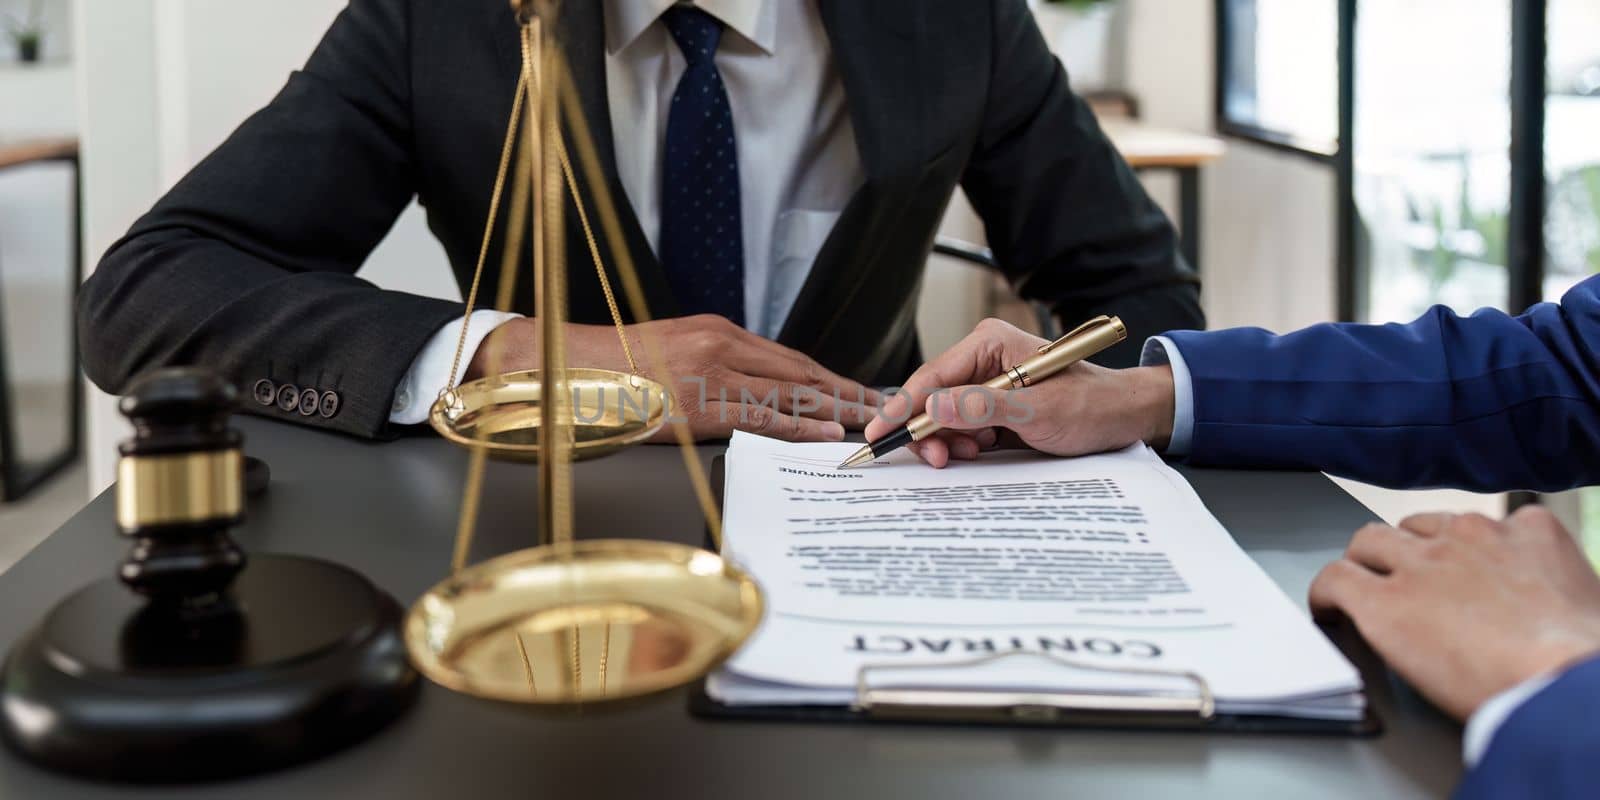 Business people and lawyers discussing contract papers with brass scale on wooden desk in office. Law, legal services, advice, Justice concept.